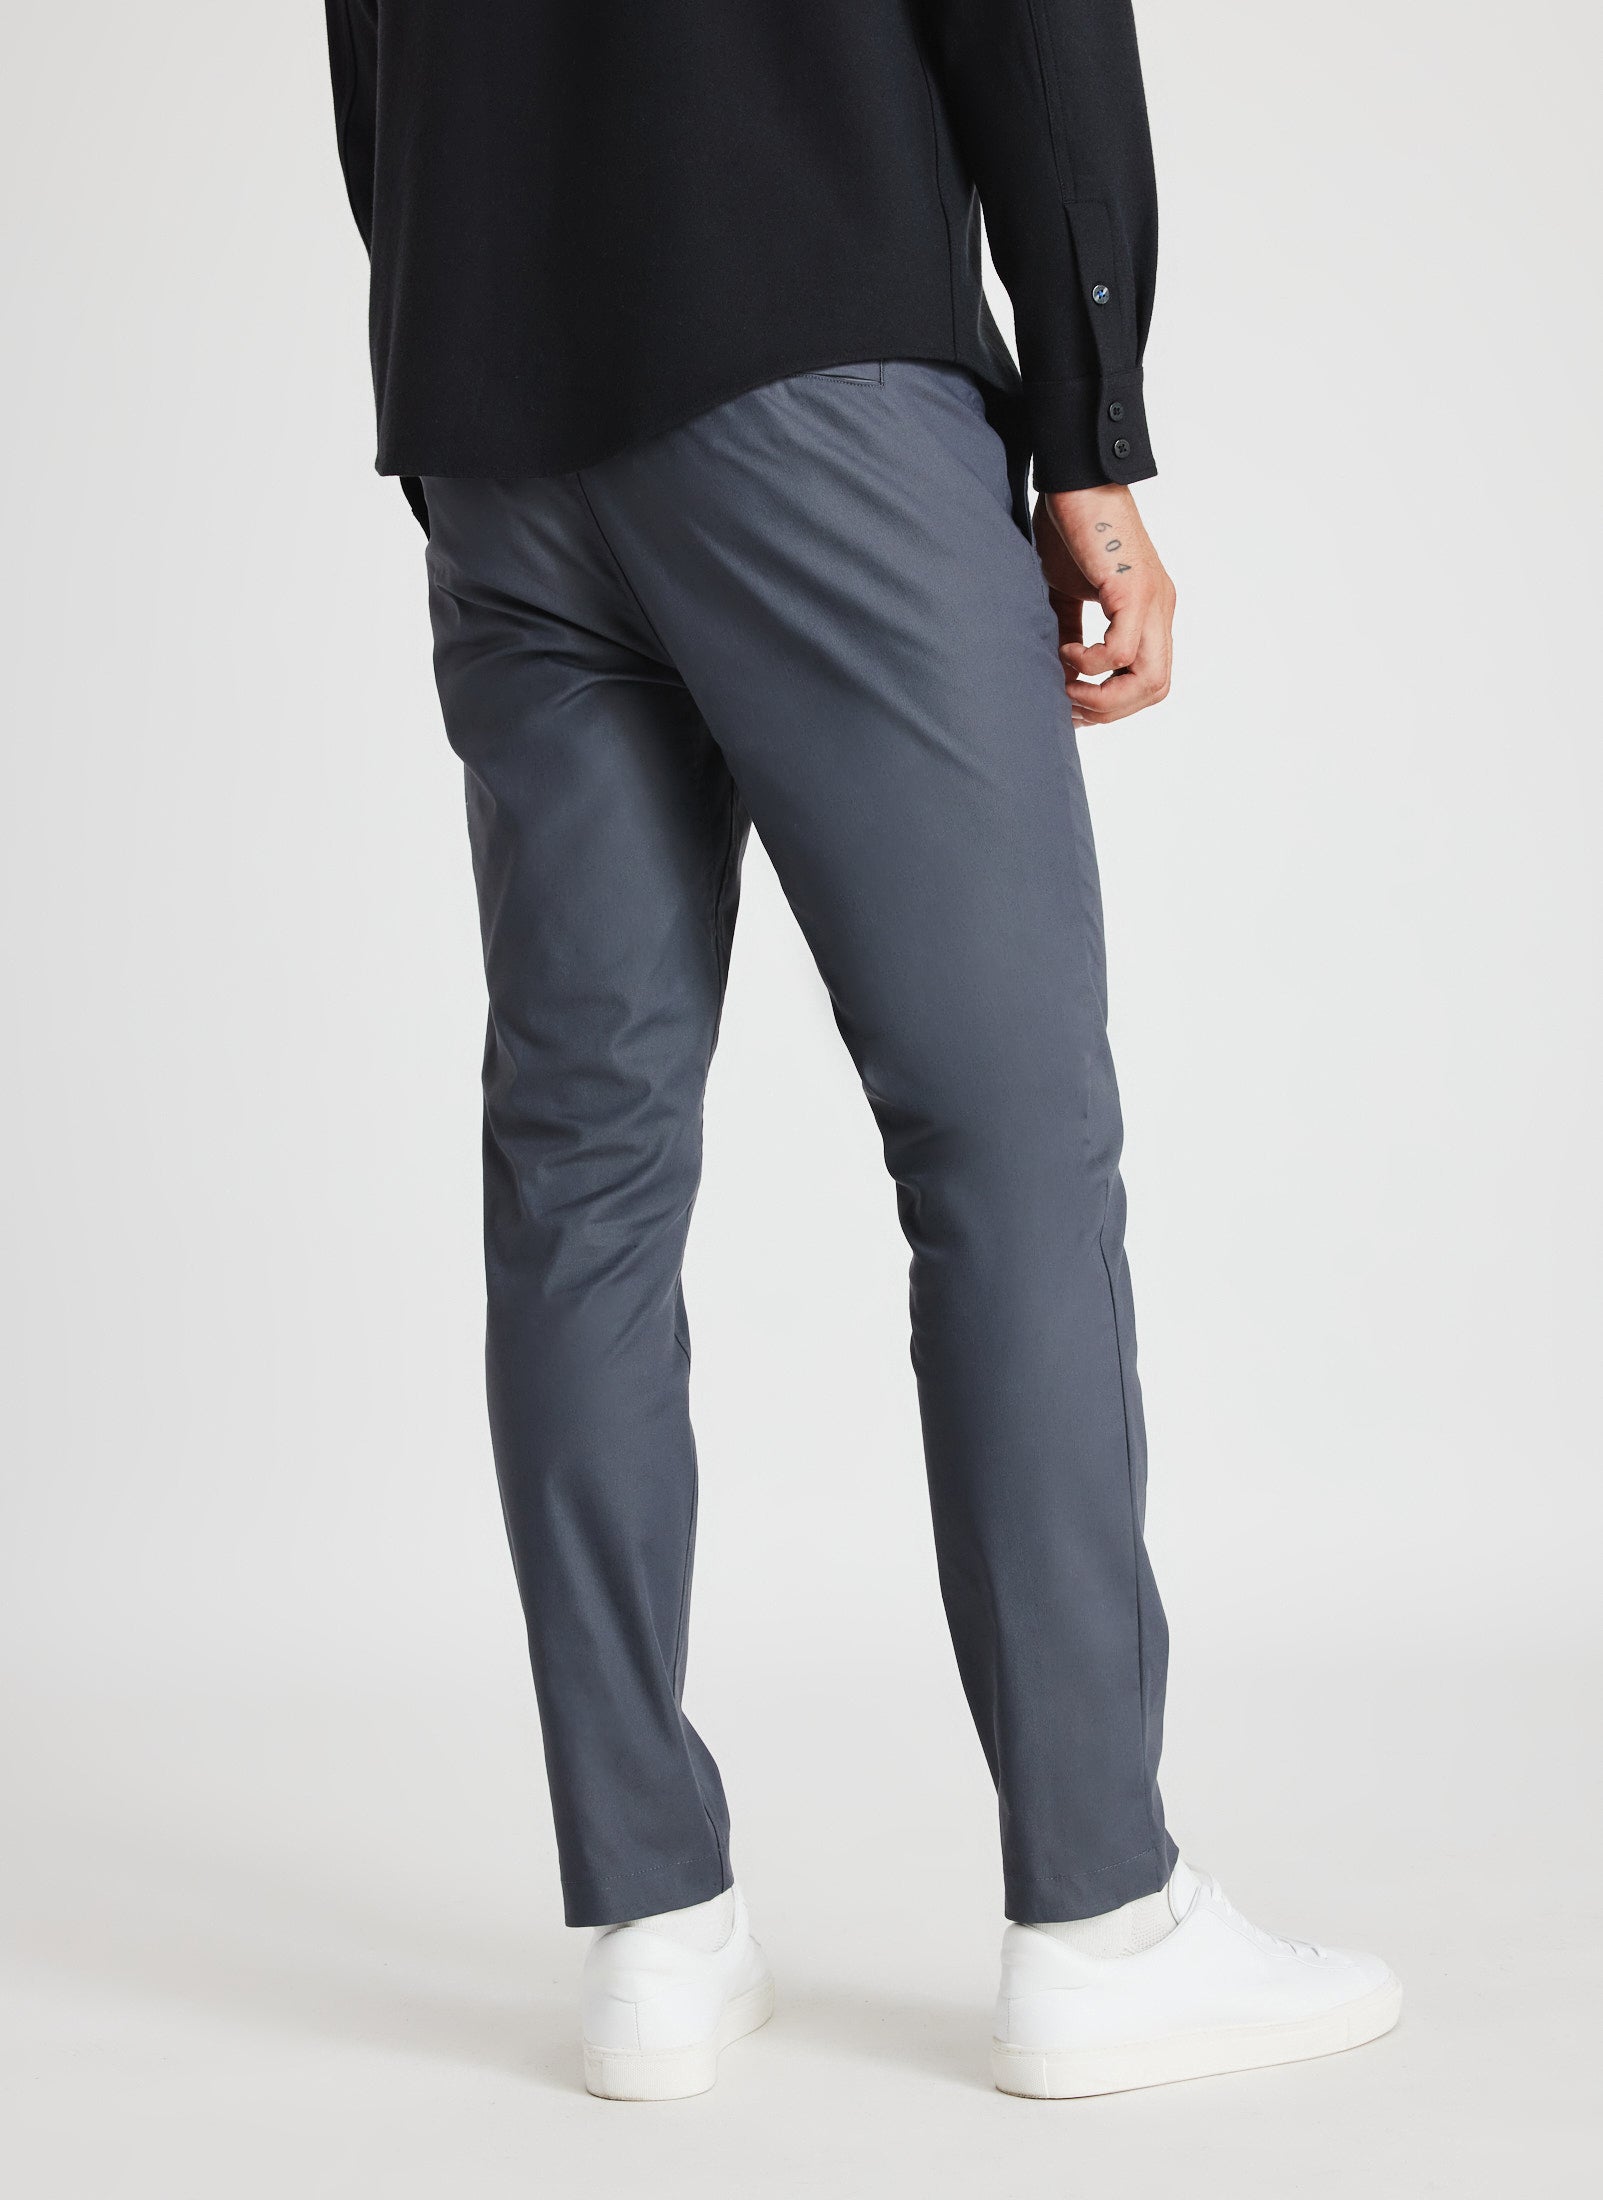 All Town Commute Pant